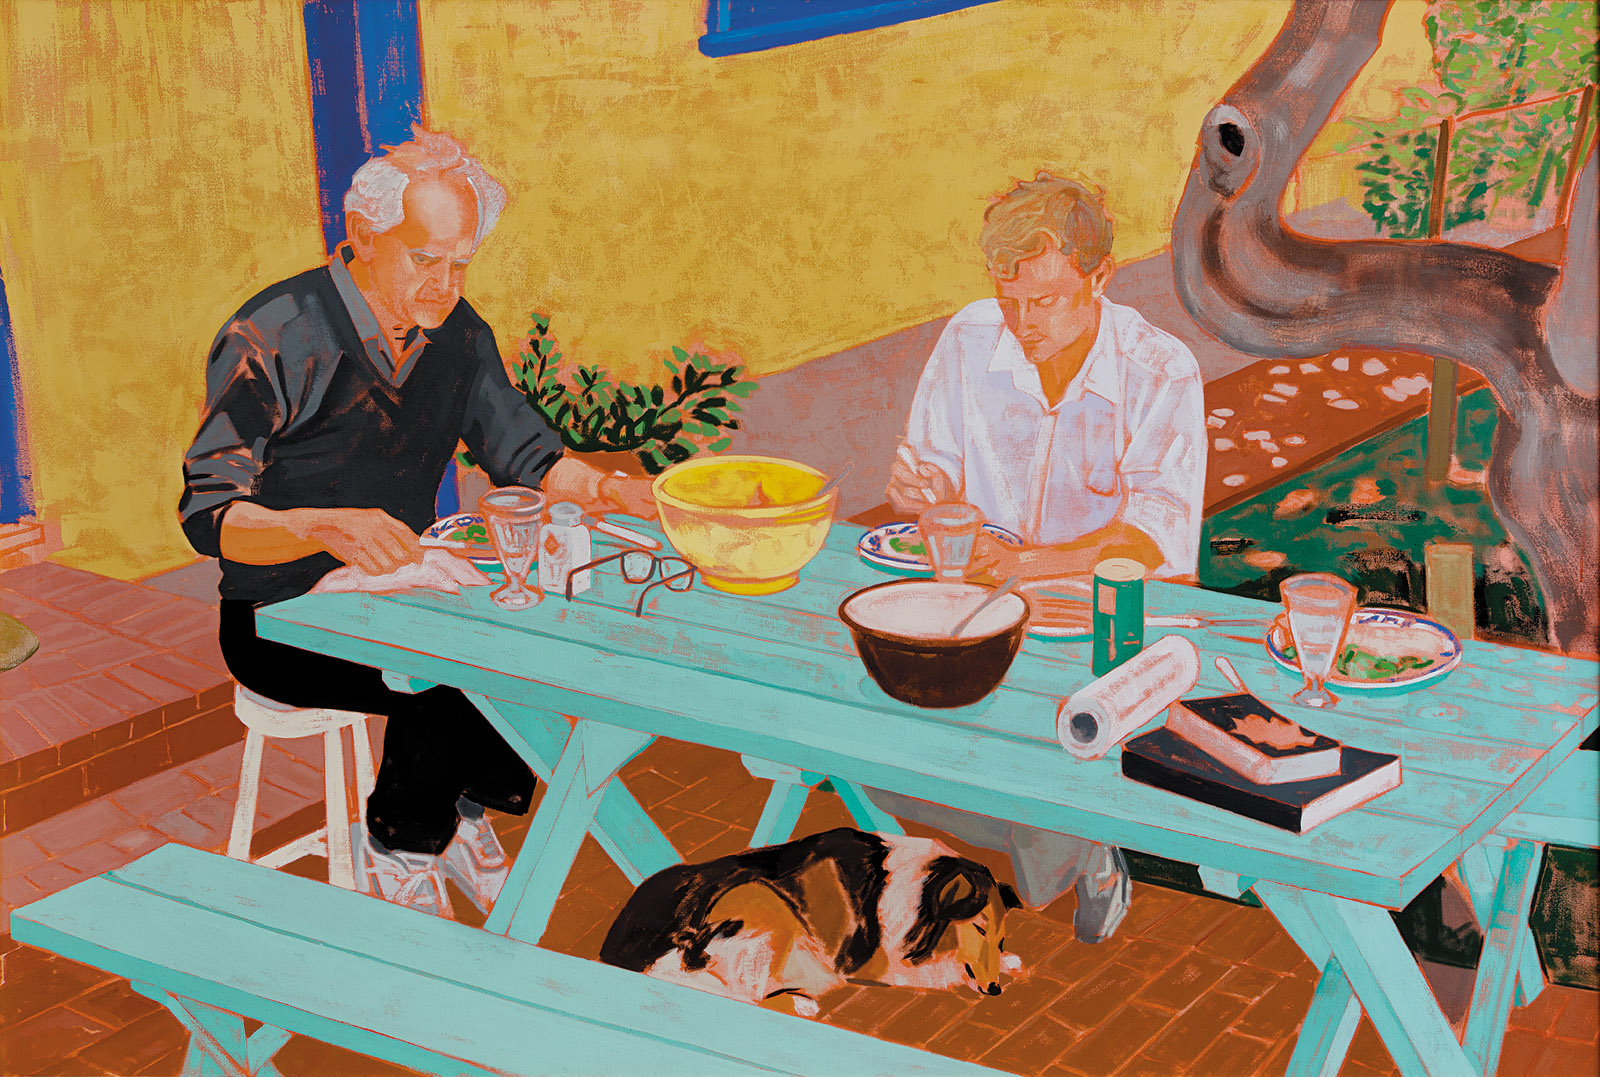 The Conversation (Manny and Steve at the Table) by Patricia Patterson